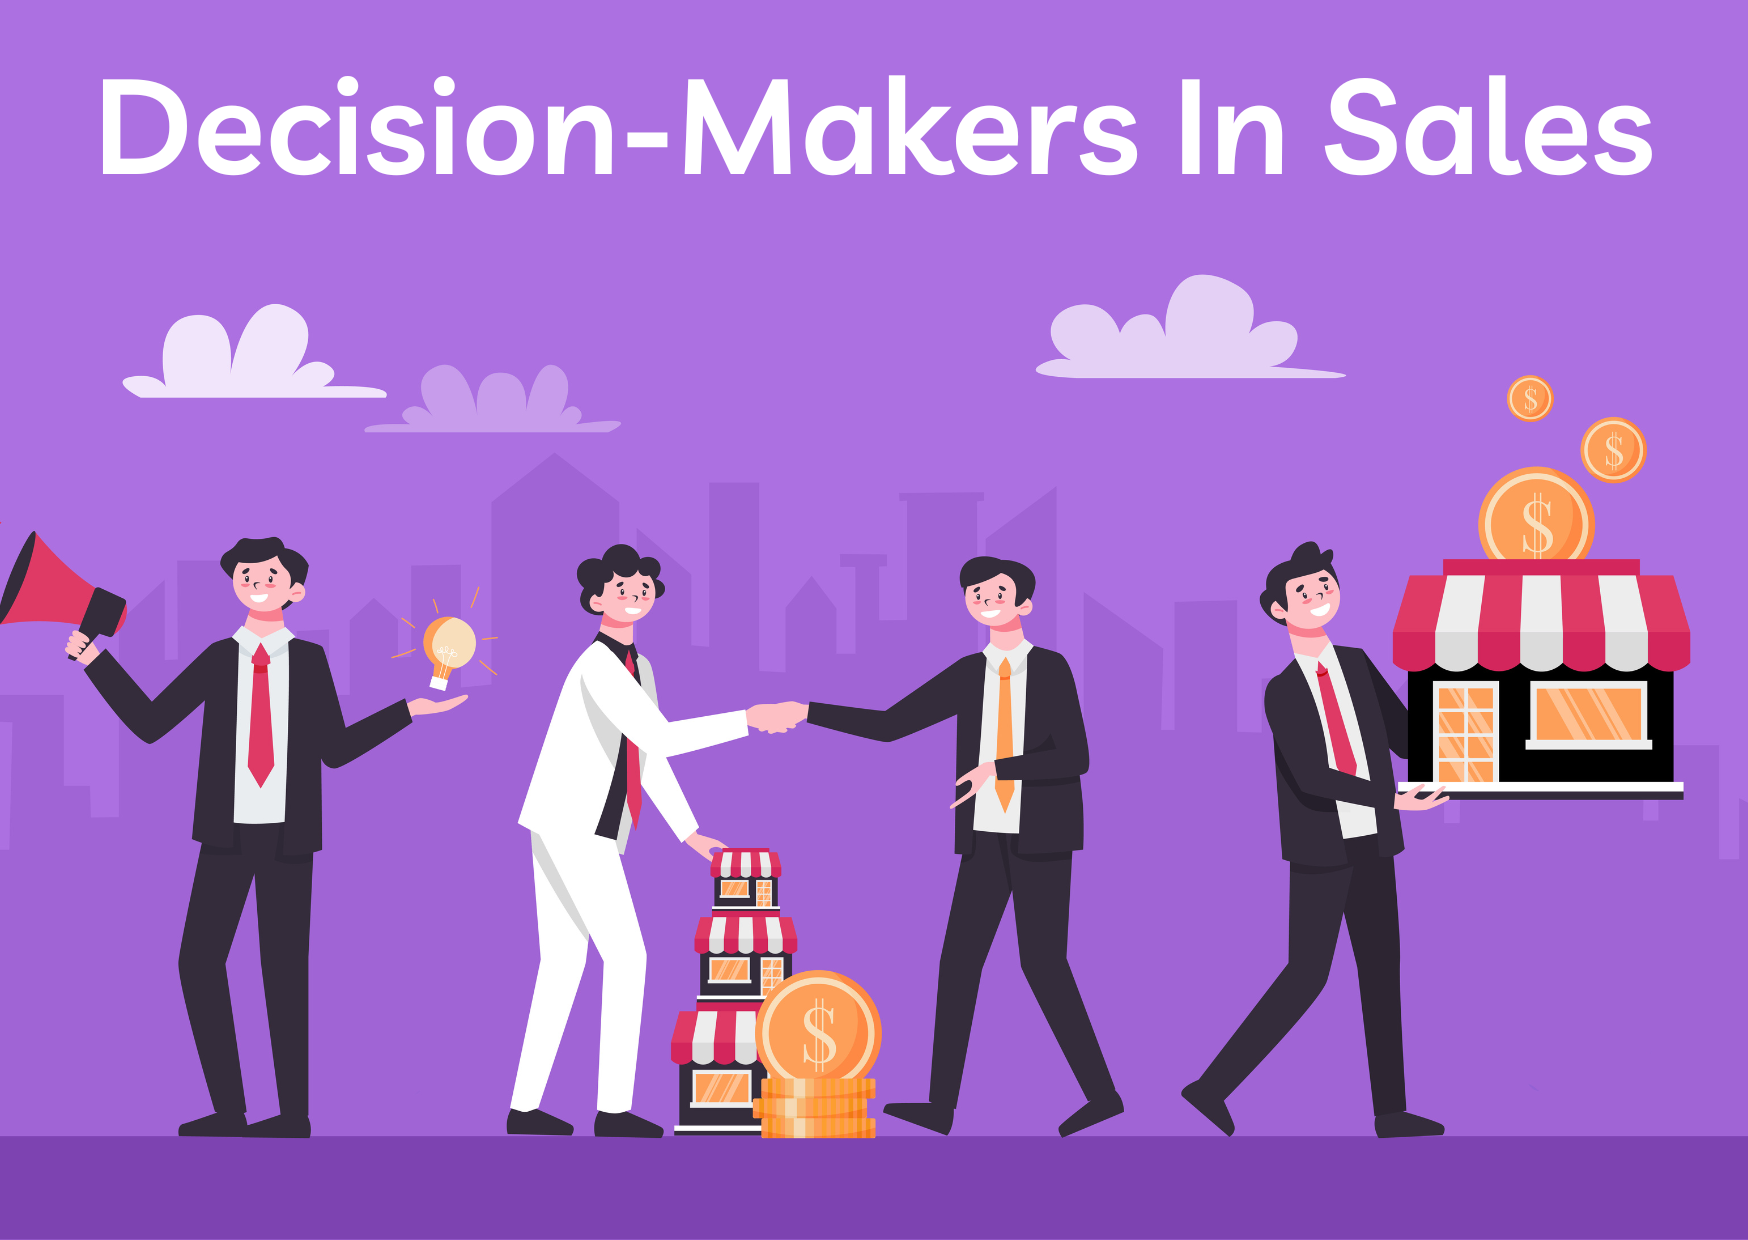 5 Different Types Of Decision-Makers in Sales